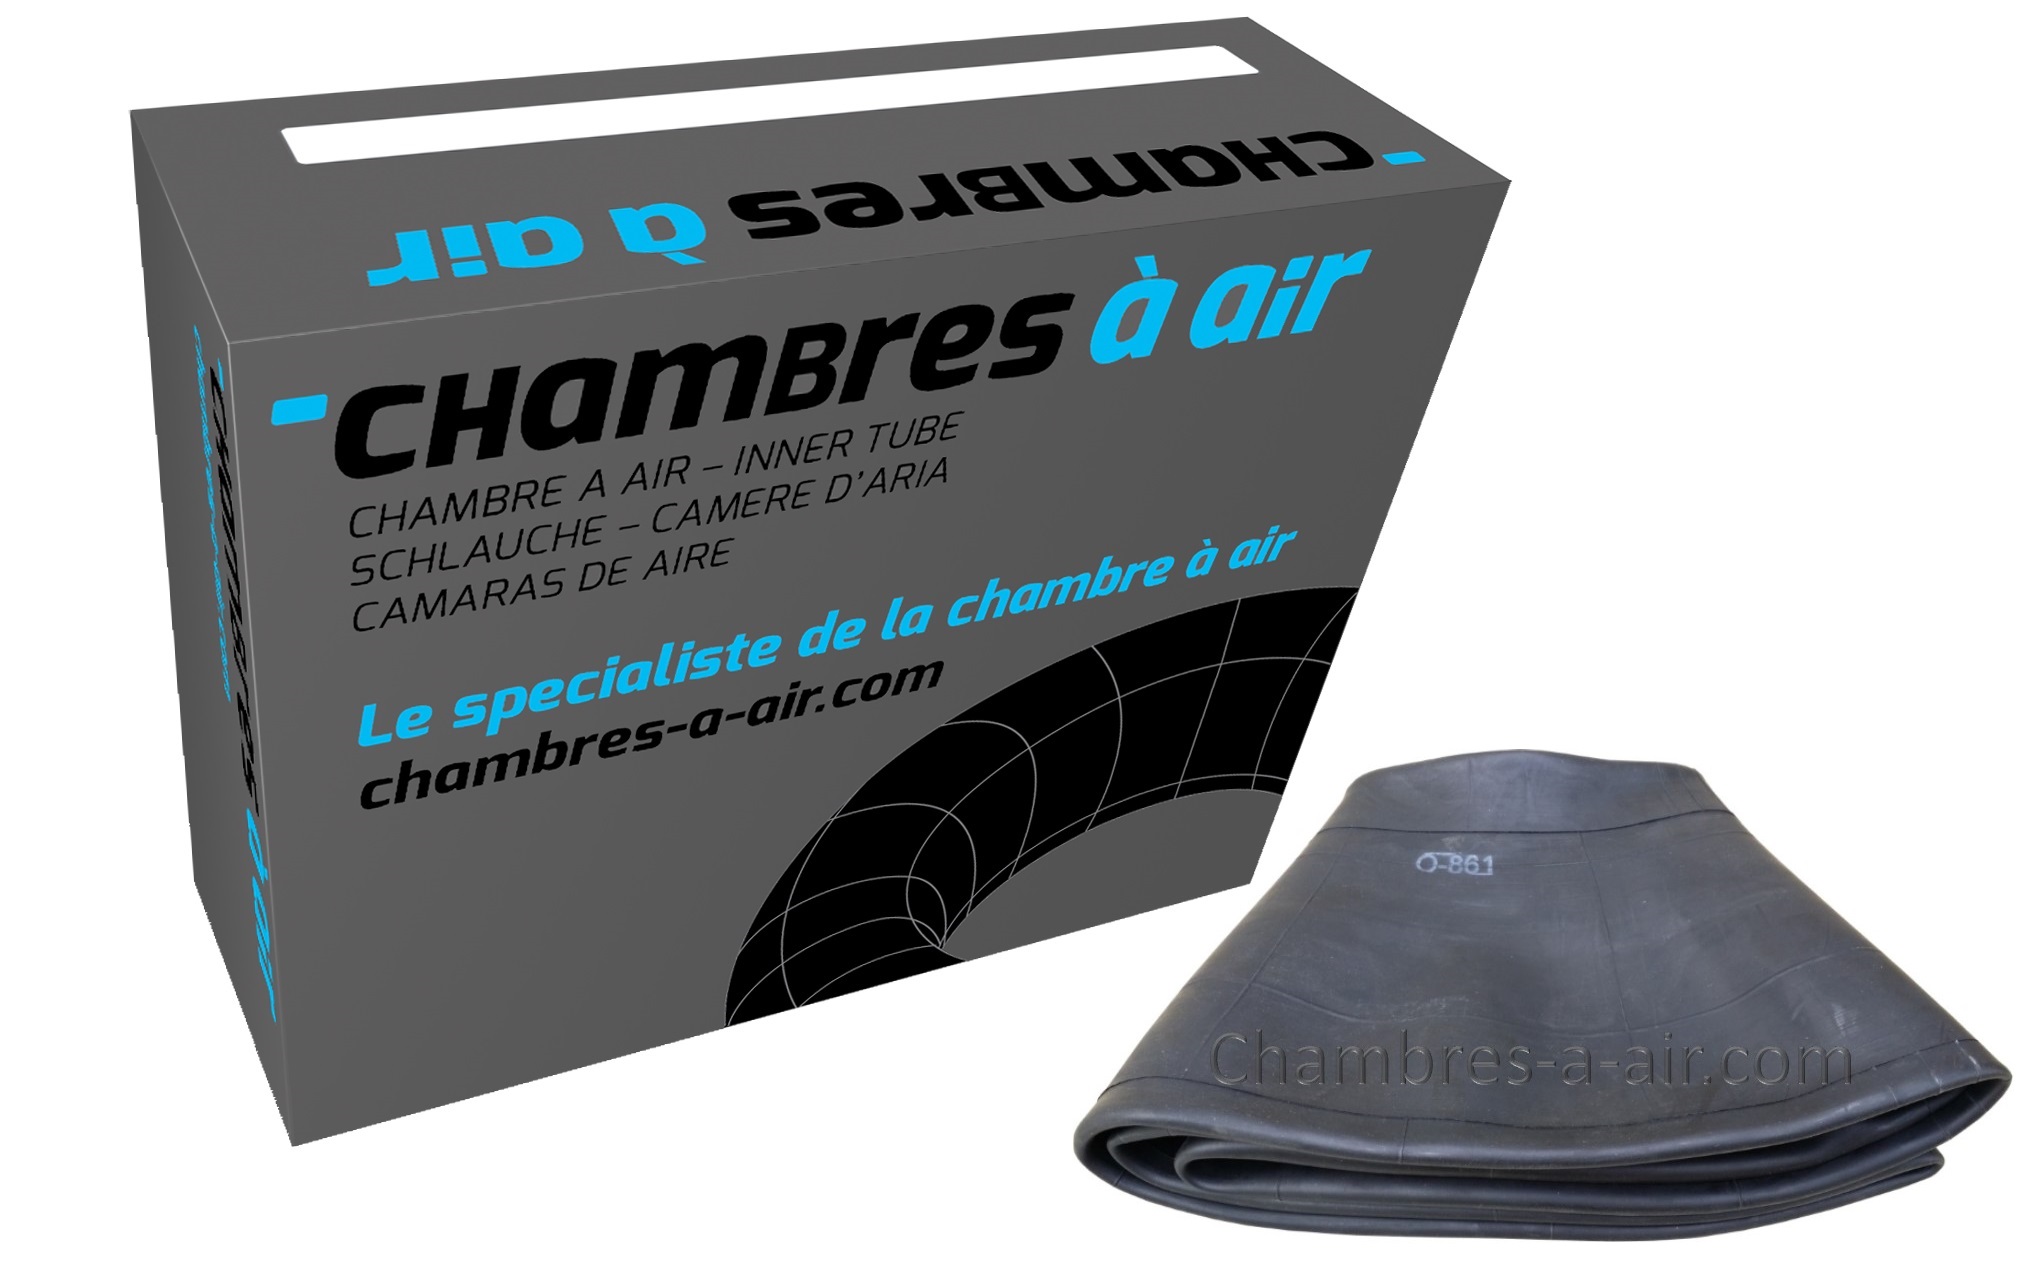 https://www.chambres-a-air.com/images/Image/CHAMBRE_A_AIR_1427808913.jpeg